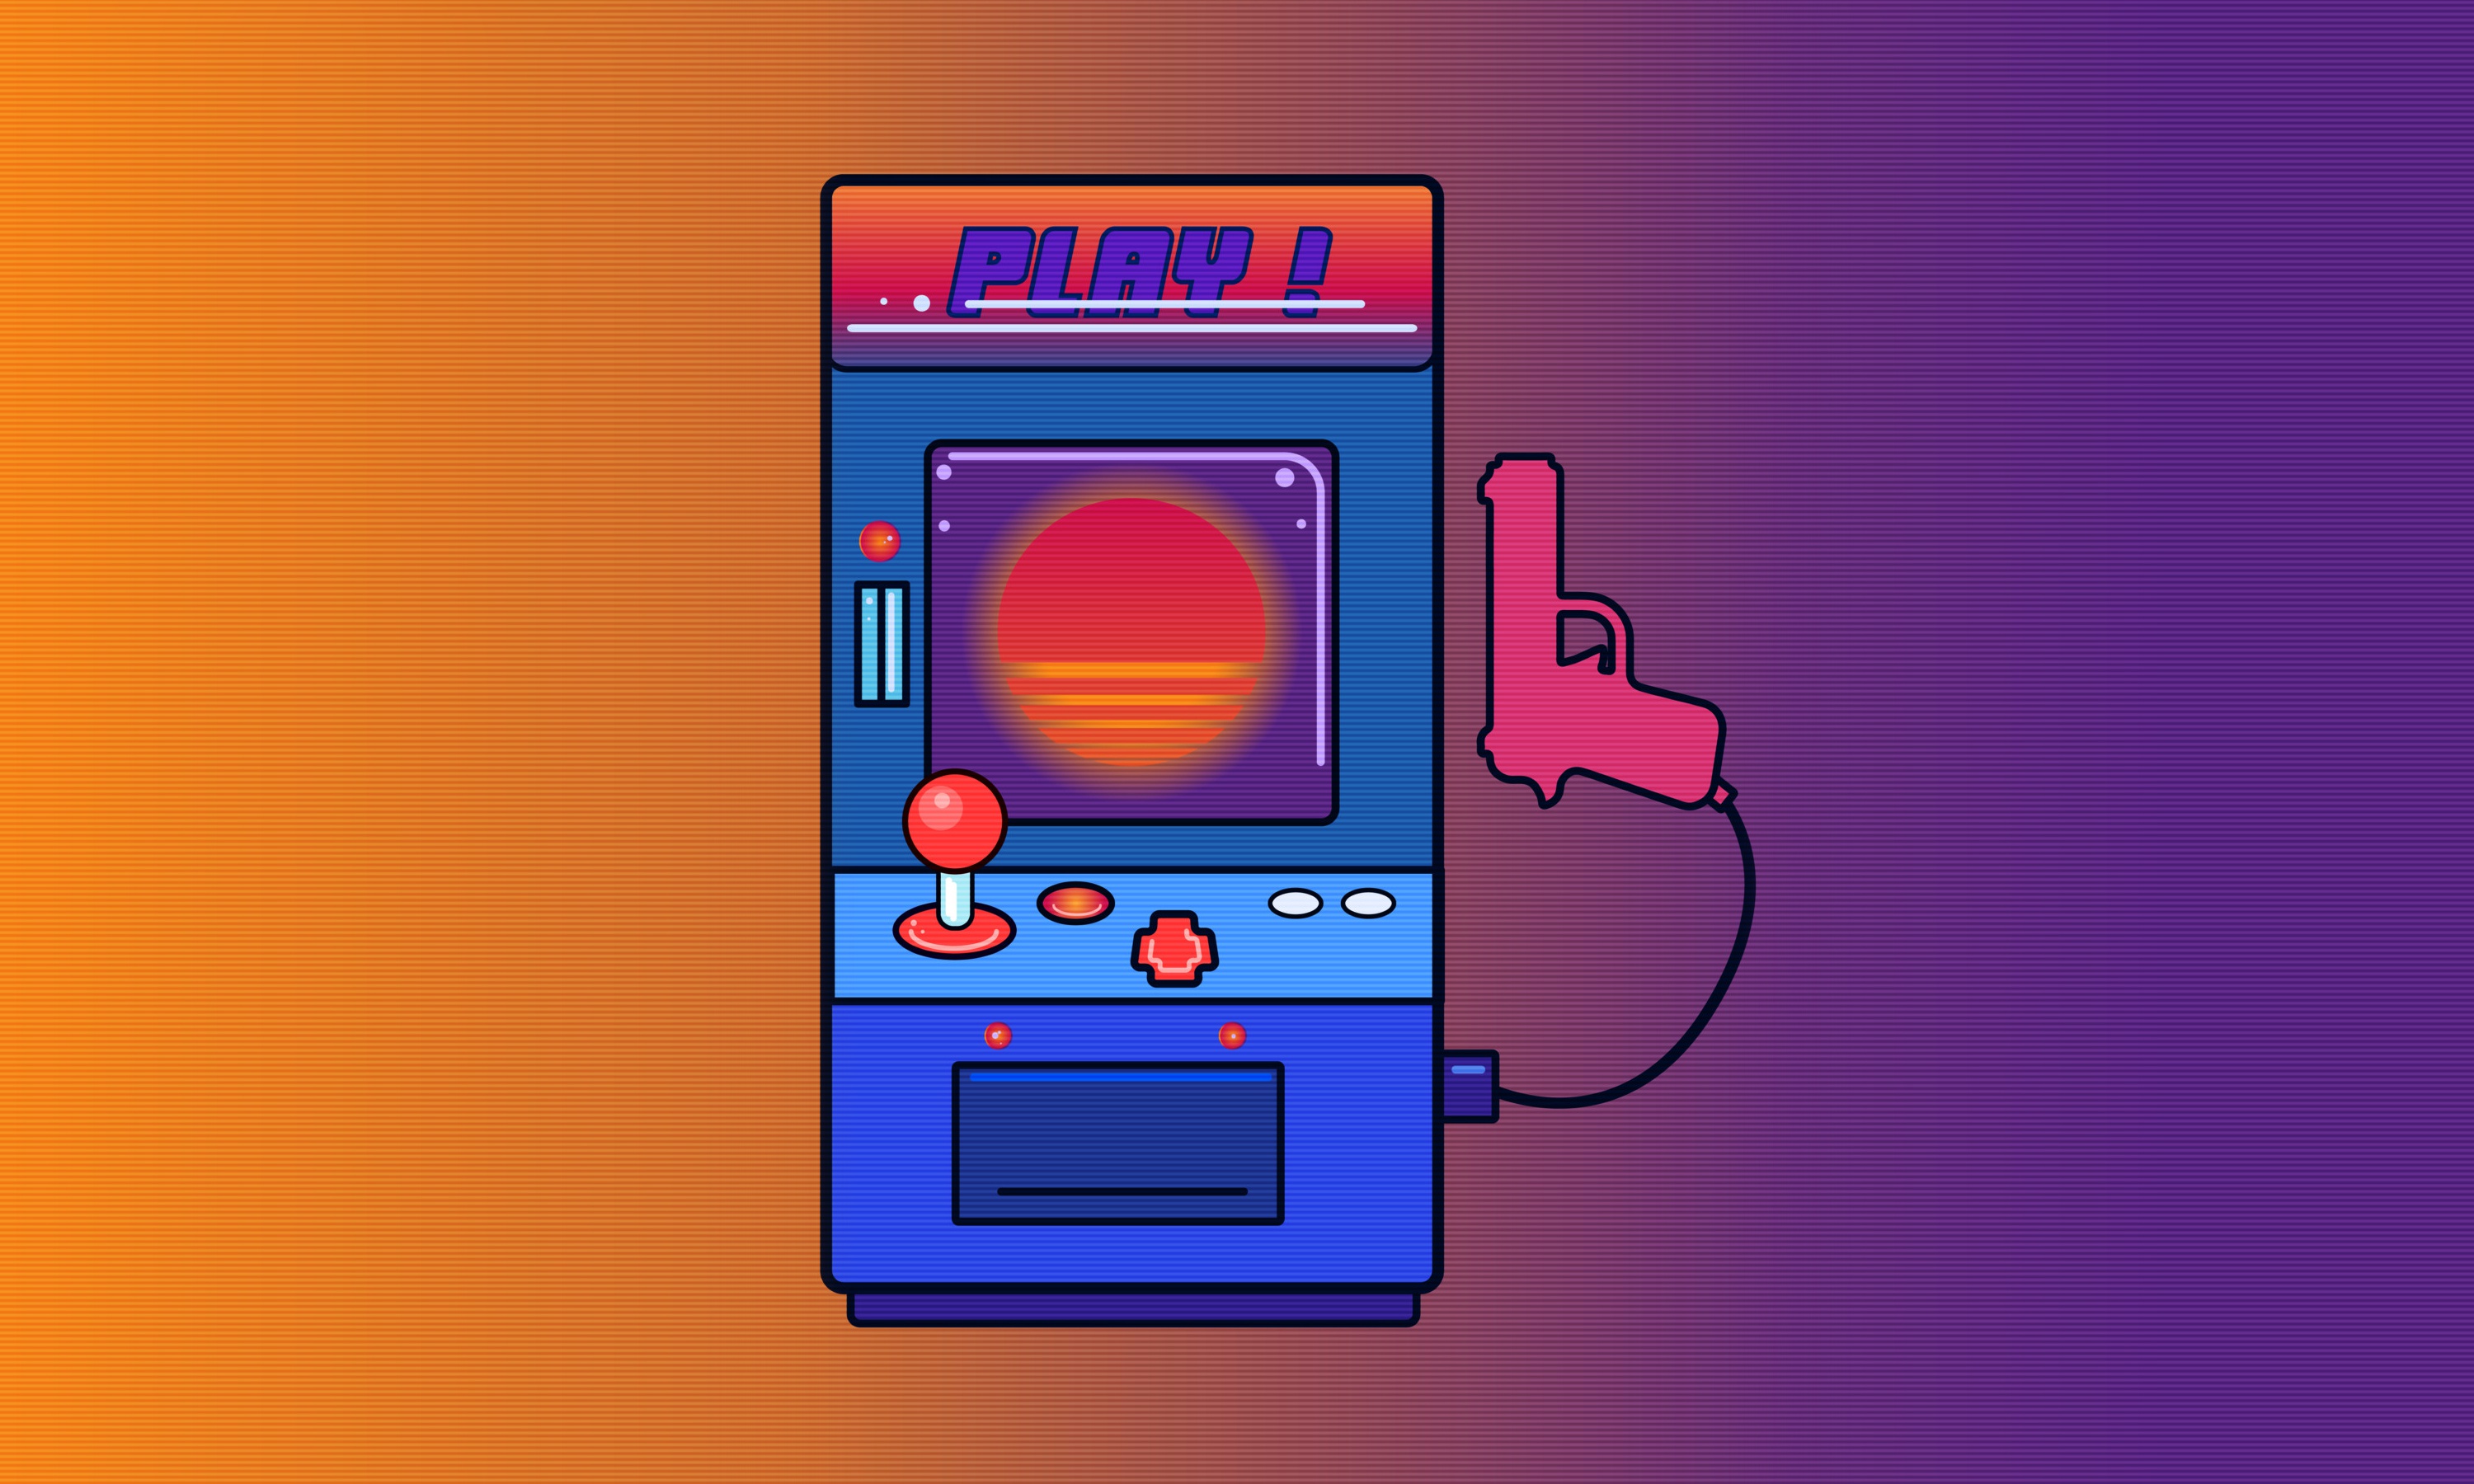  Arcade  Games  Retro  Wave HD Artist 4k  Wallpapers  Images 